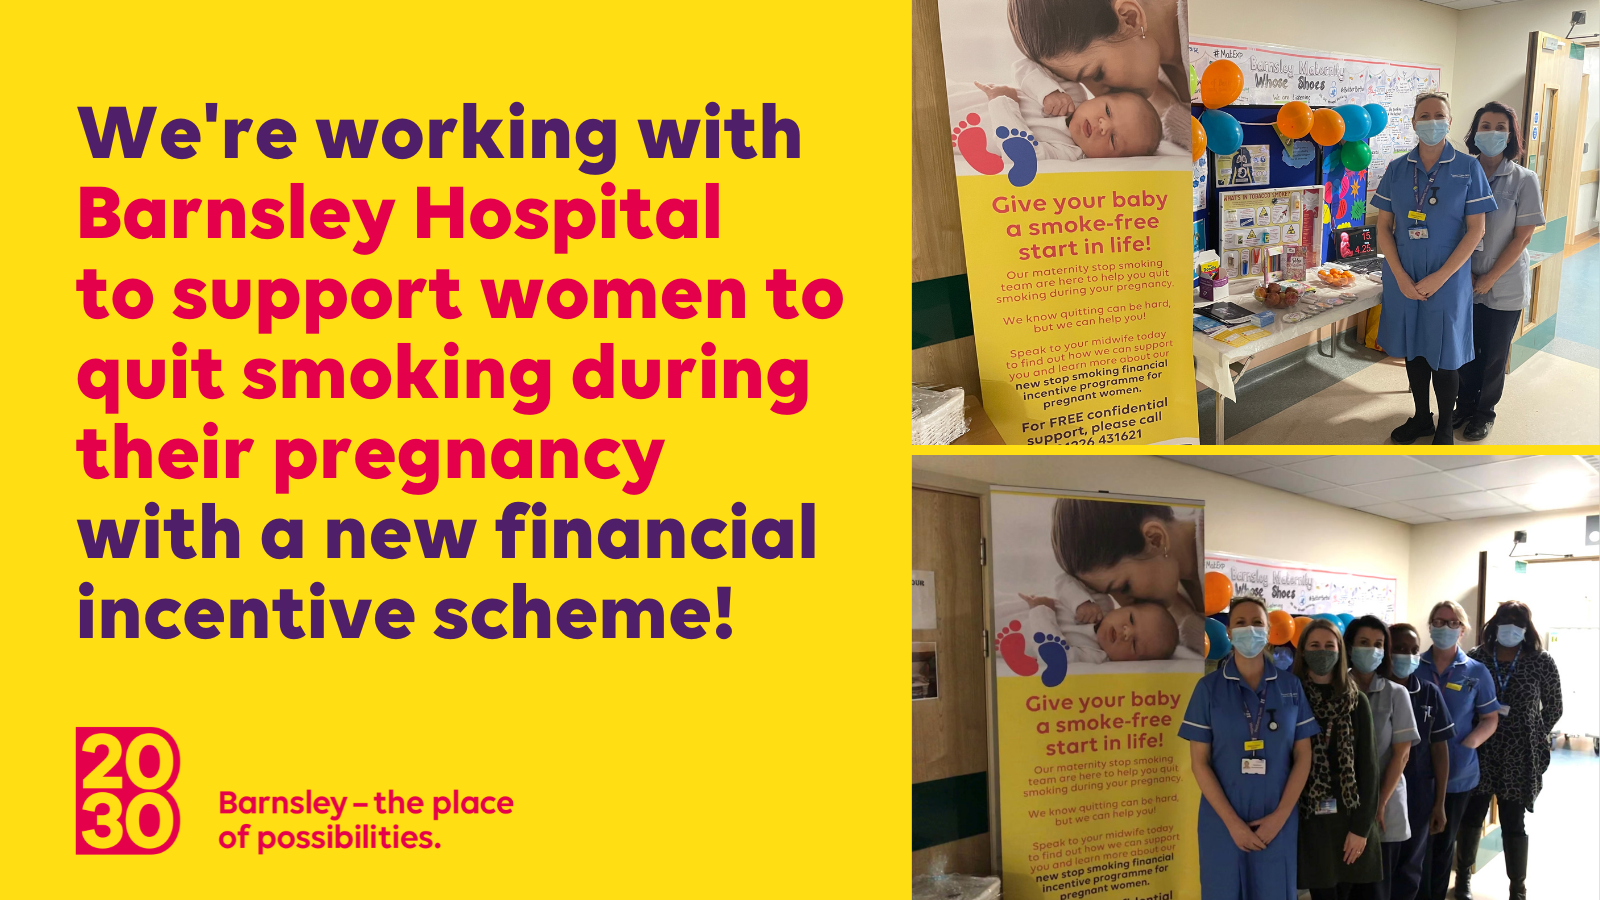 We're working with Barnsley Hospital to support women to quit smoking during their pregnancy with a new financial incentive scheme!